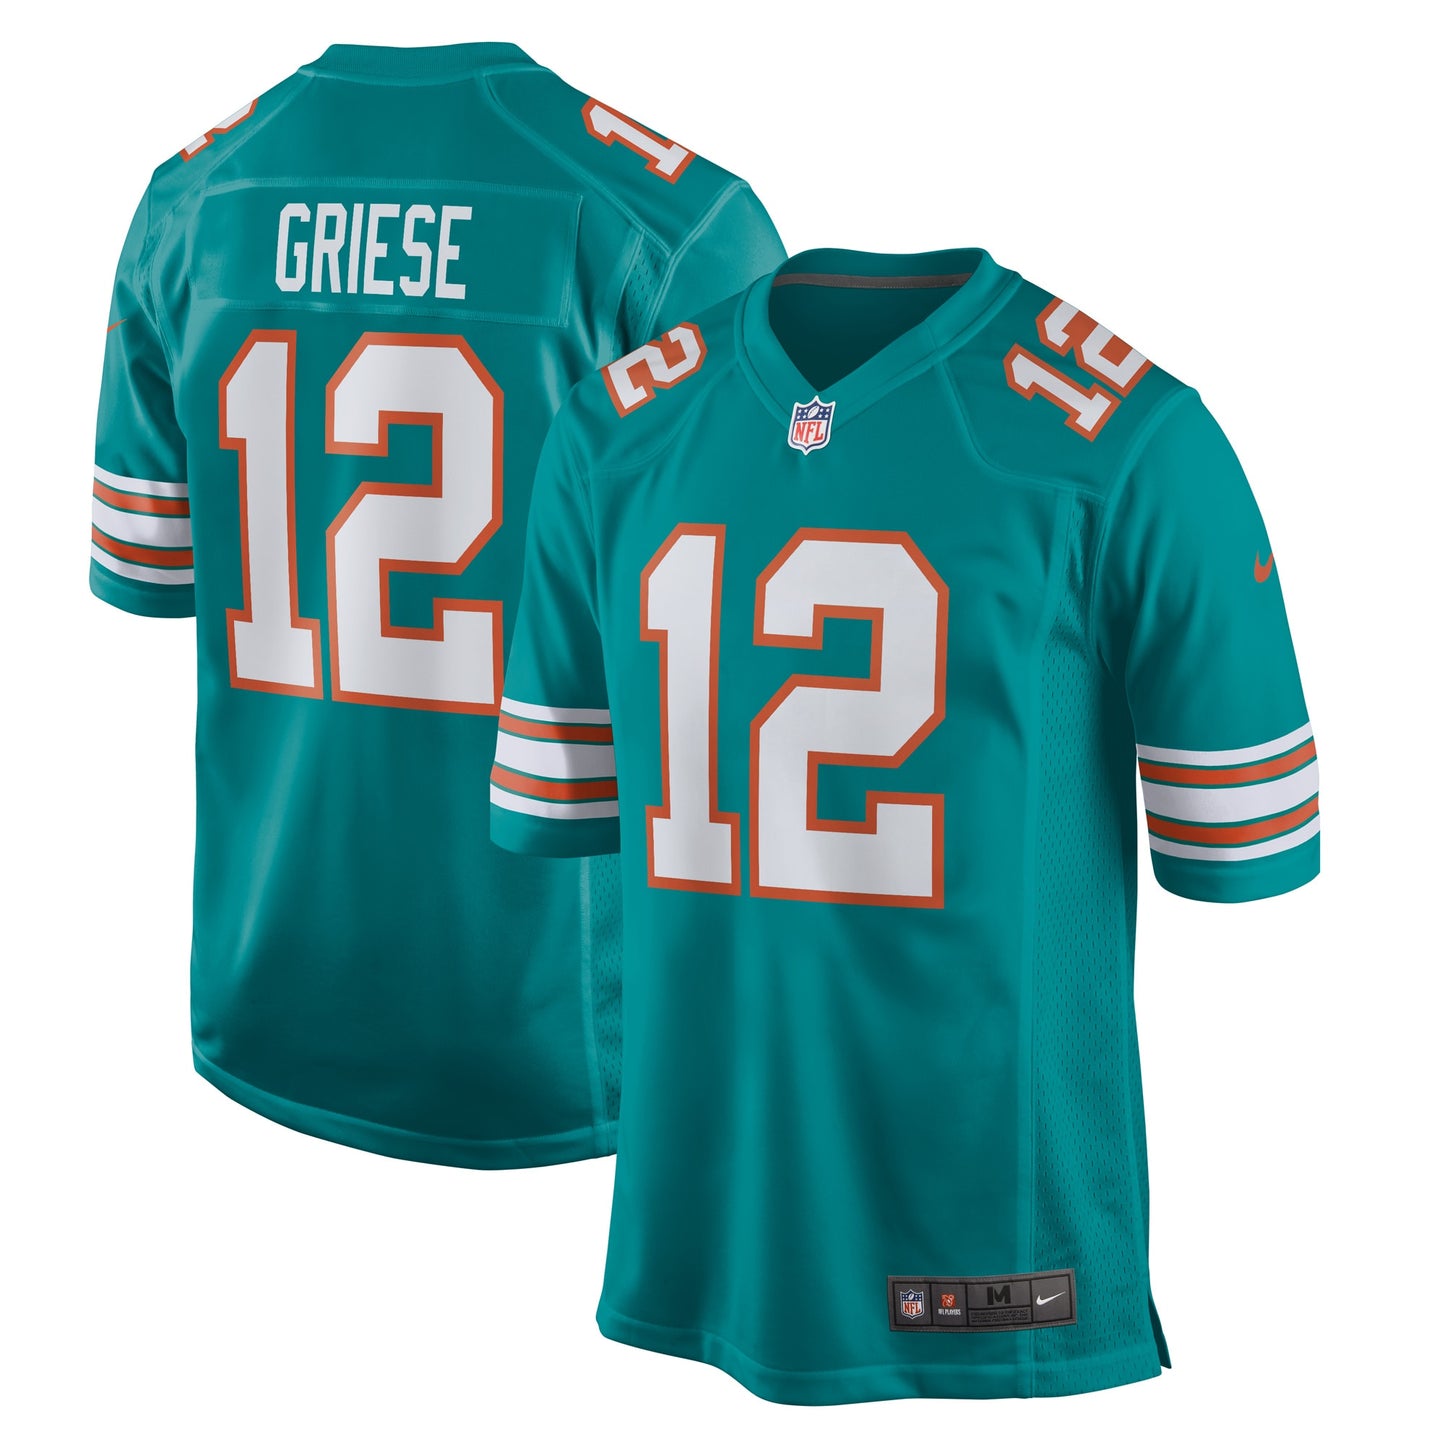 Bob Griese Miami Dolphins Nike Retired Player Jersey - Aqua